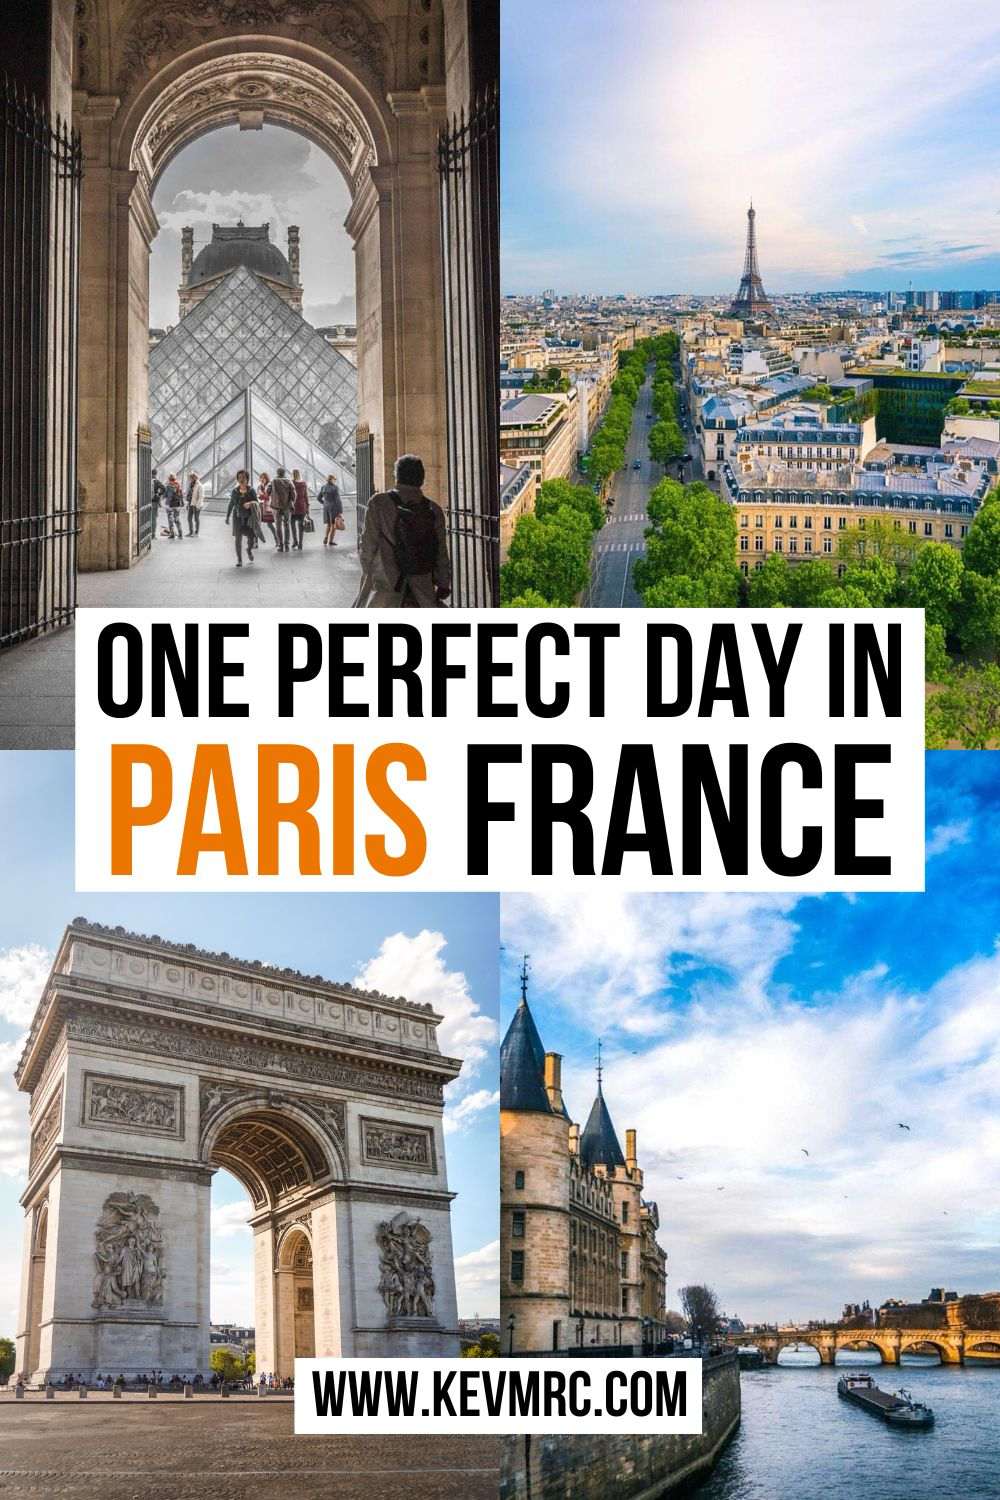 Wondering what to do in Paris for a day? Find here the best one day in Paris itinerary with helpful tips from a local and a free map. how to spend one day in paris | how to spend 1 day in paris | paris 1 day itinerary | paris in one day itinerary | what to see in paris in one day | things to do in paris in one day | the best of paris in one day | paris travel itinerary #paristravel